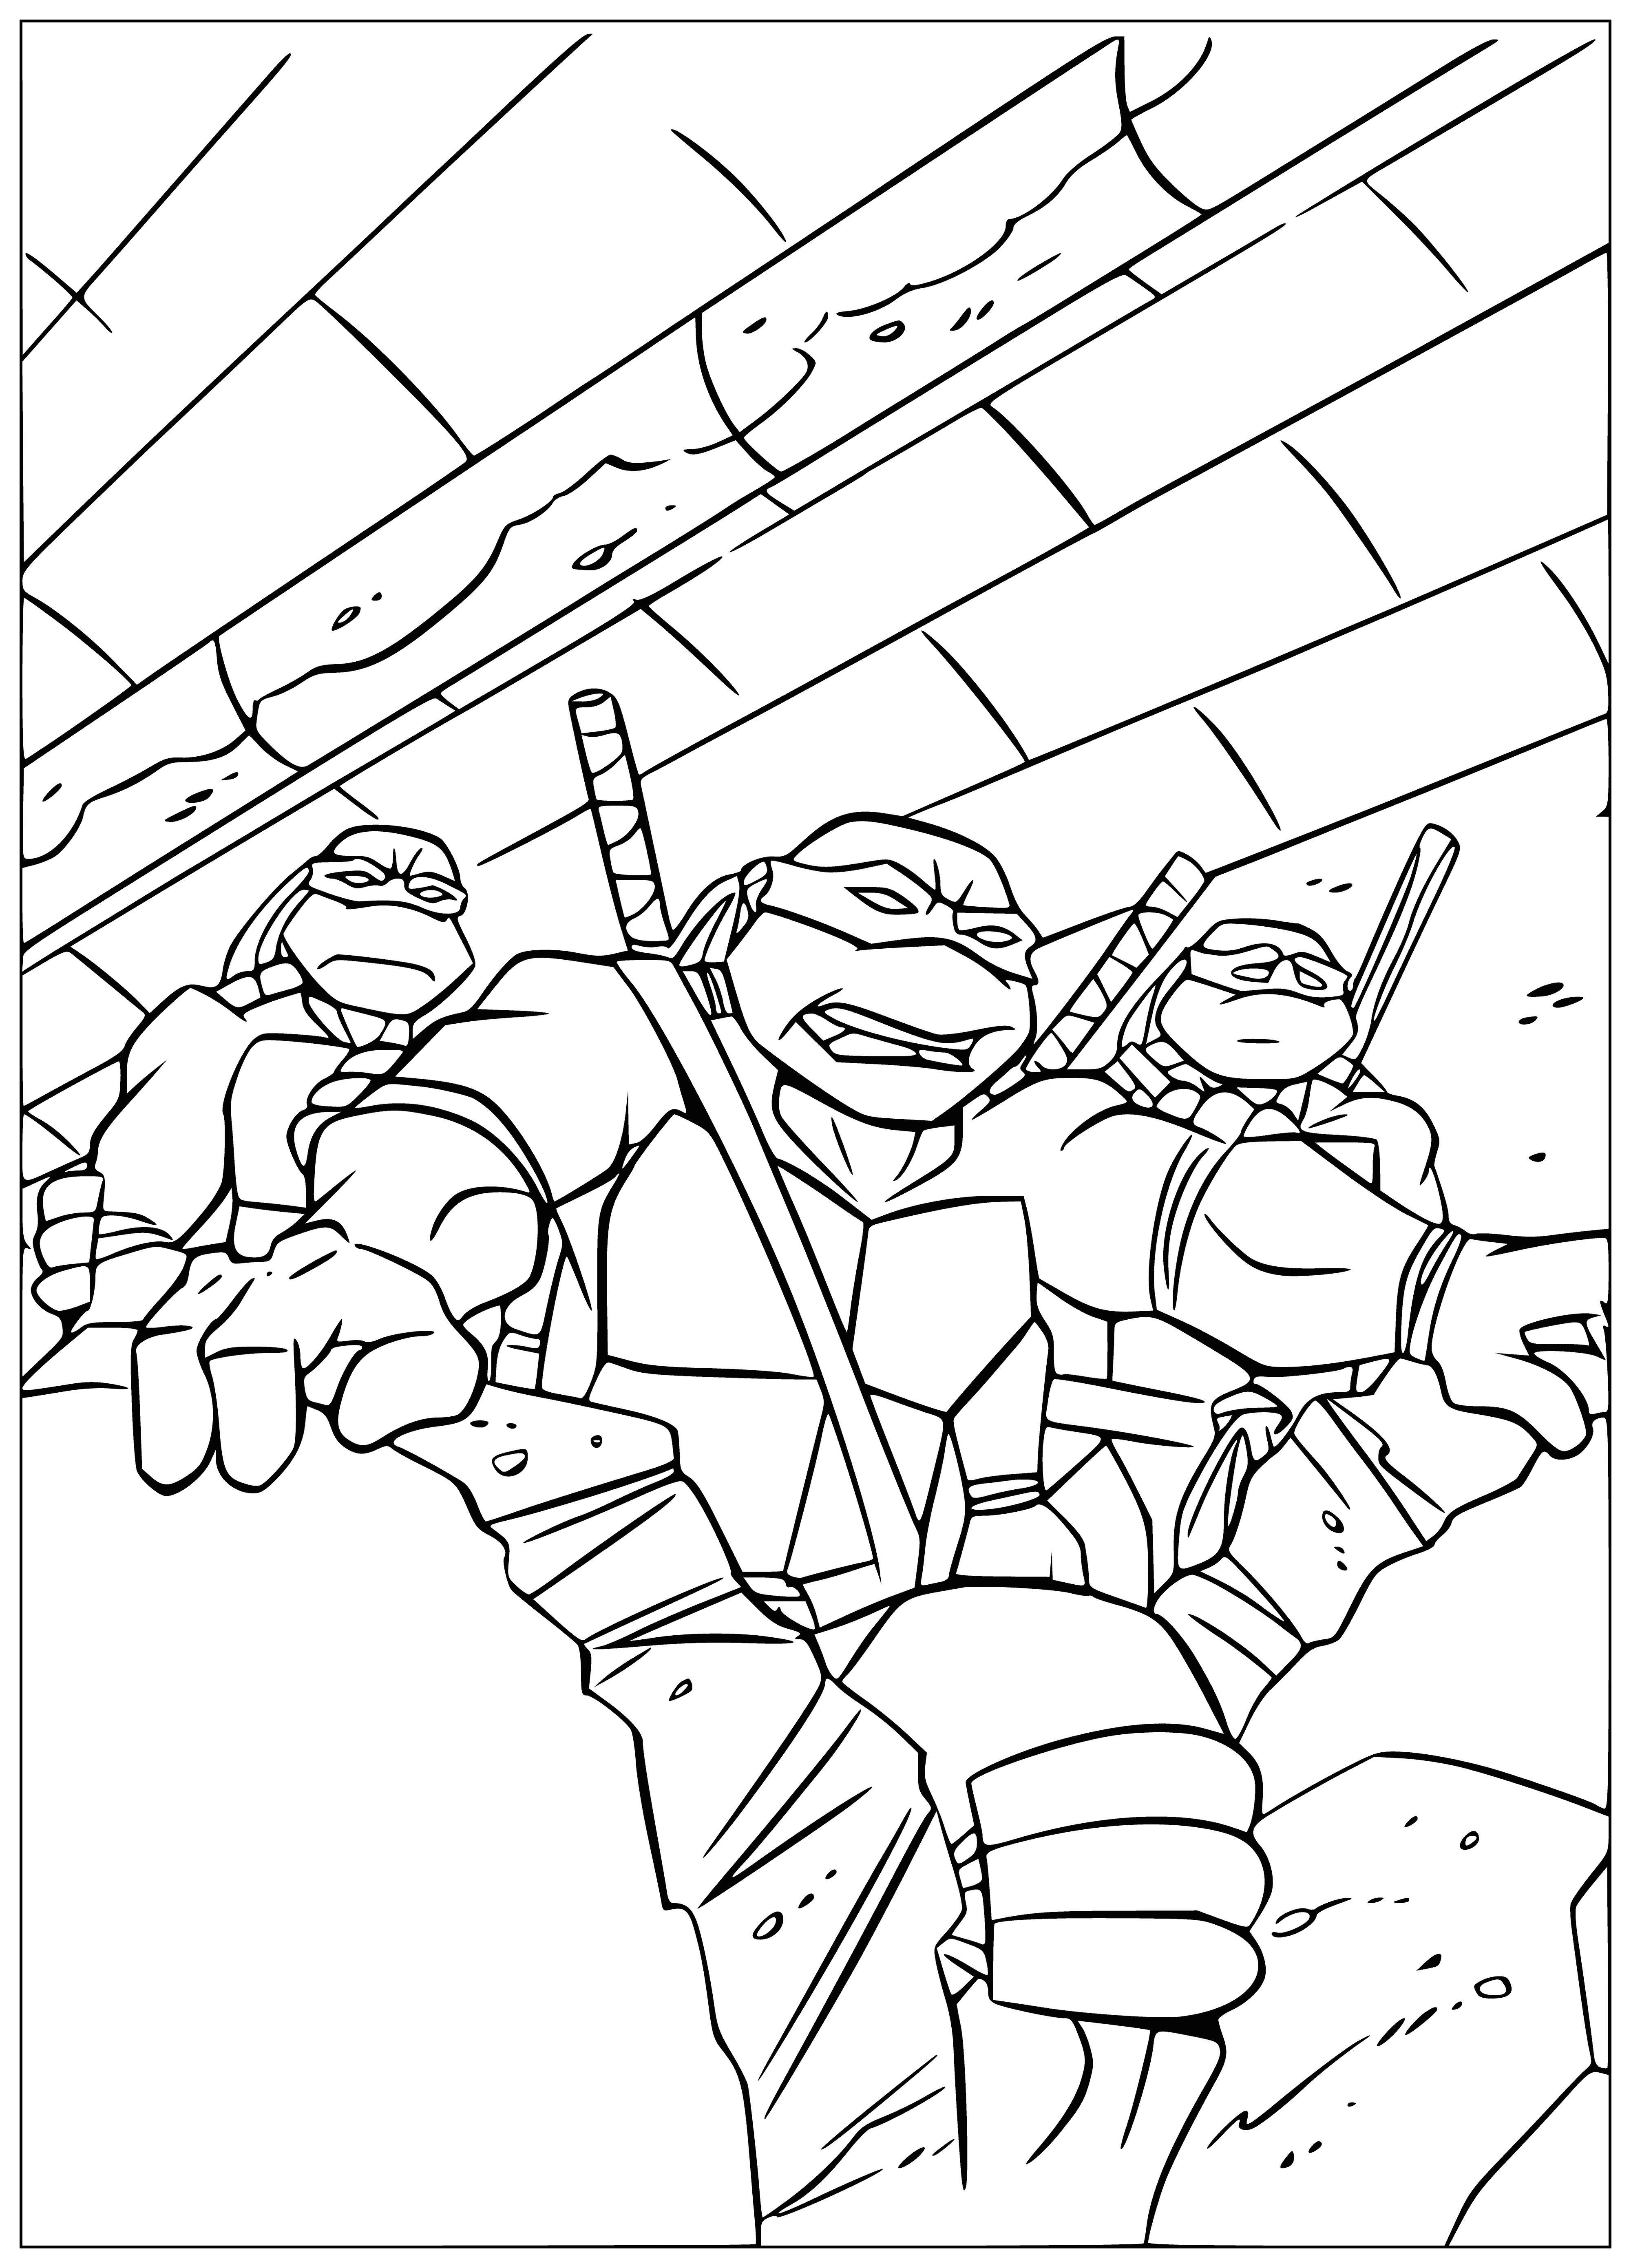 Turtles in the sewers coloring page